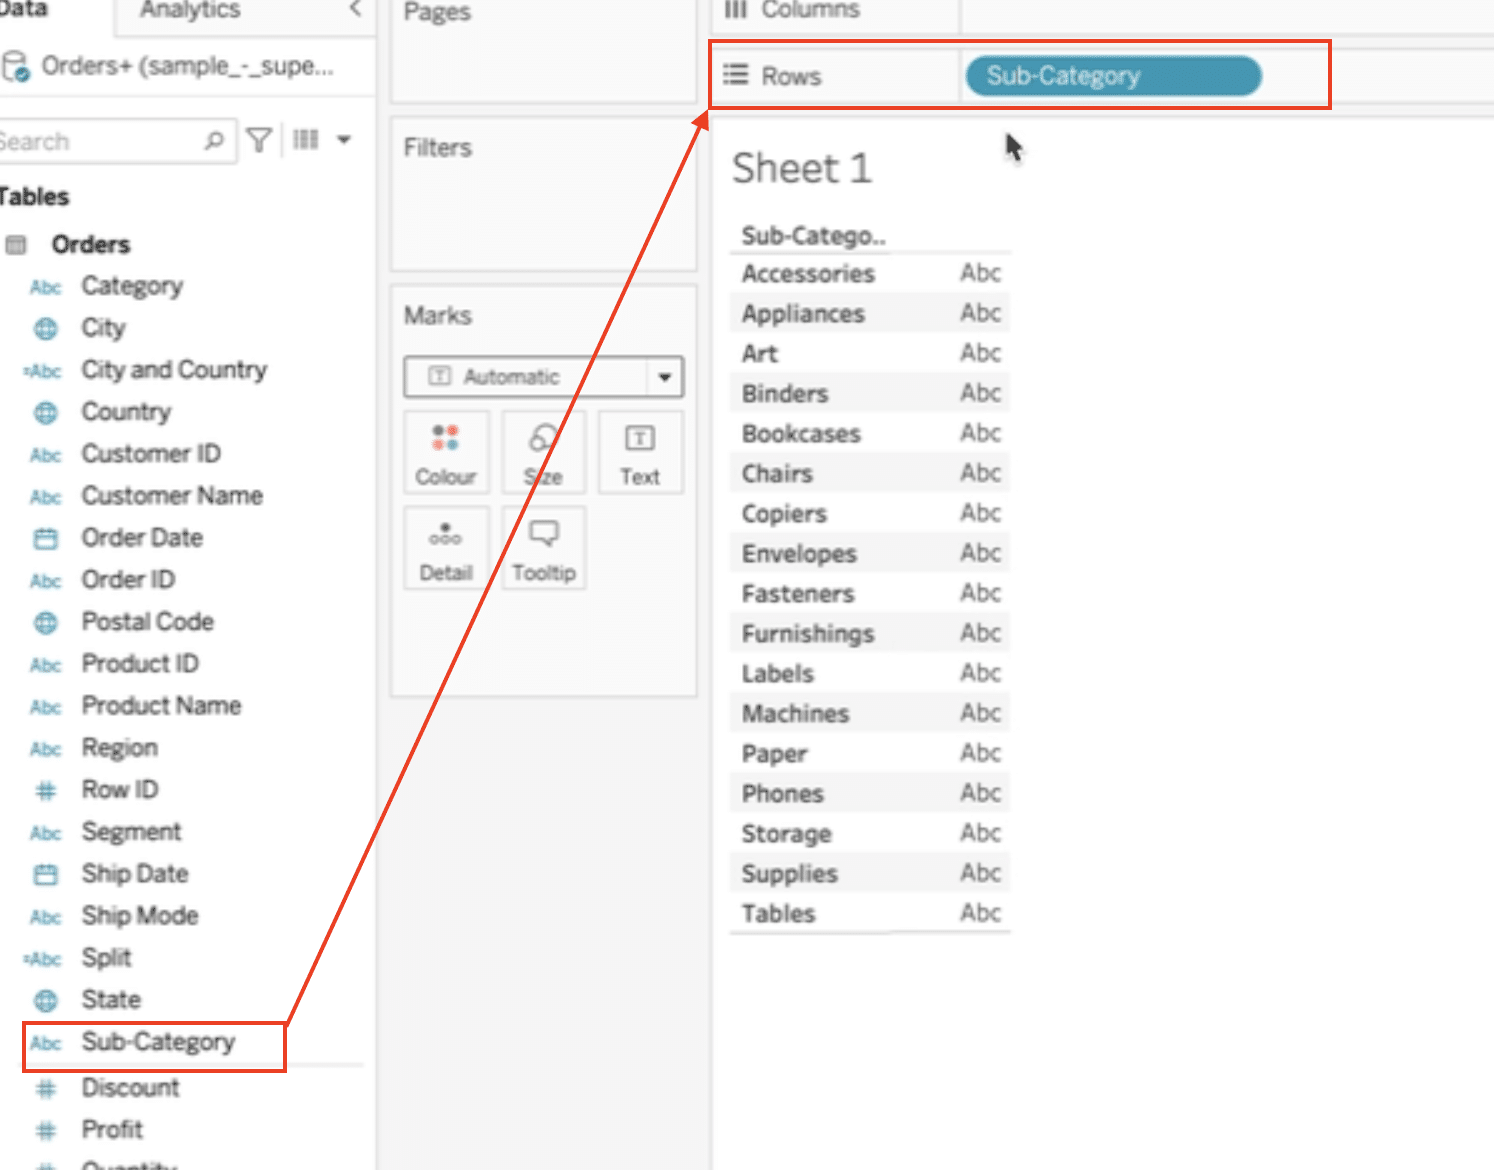 Adding the Order Date dimension to the Columns shelf in the Tableau worksheet.